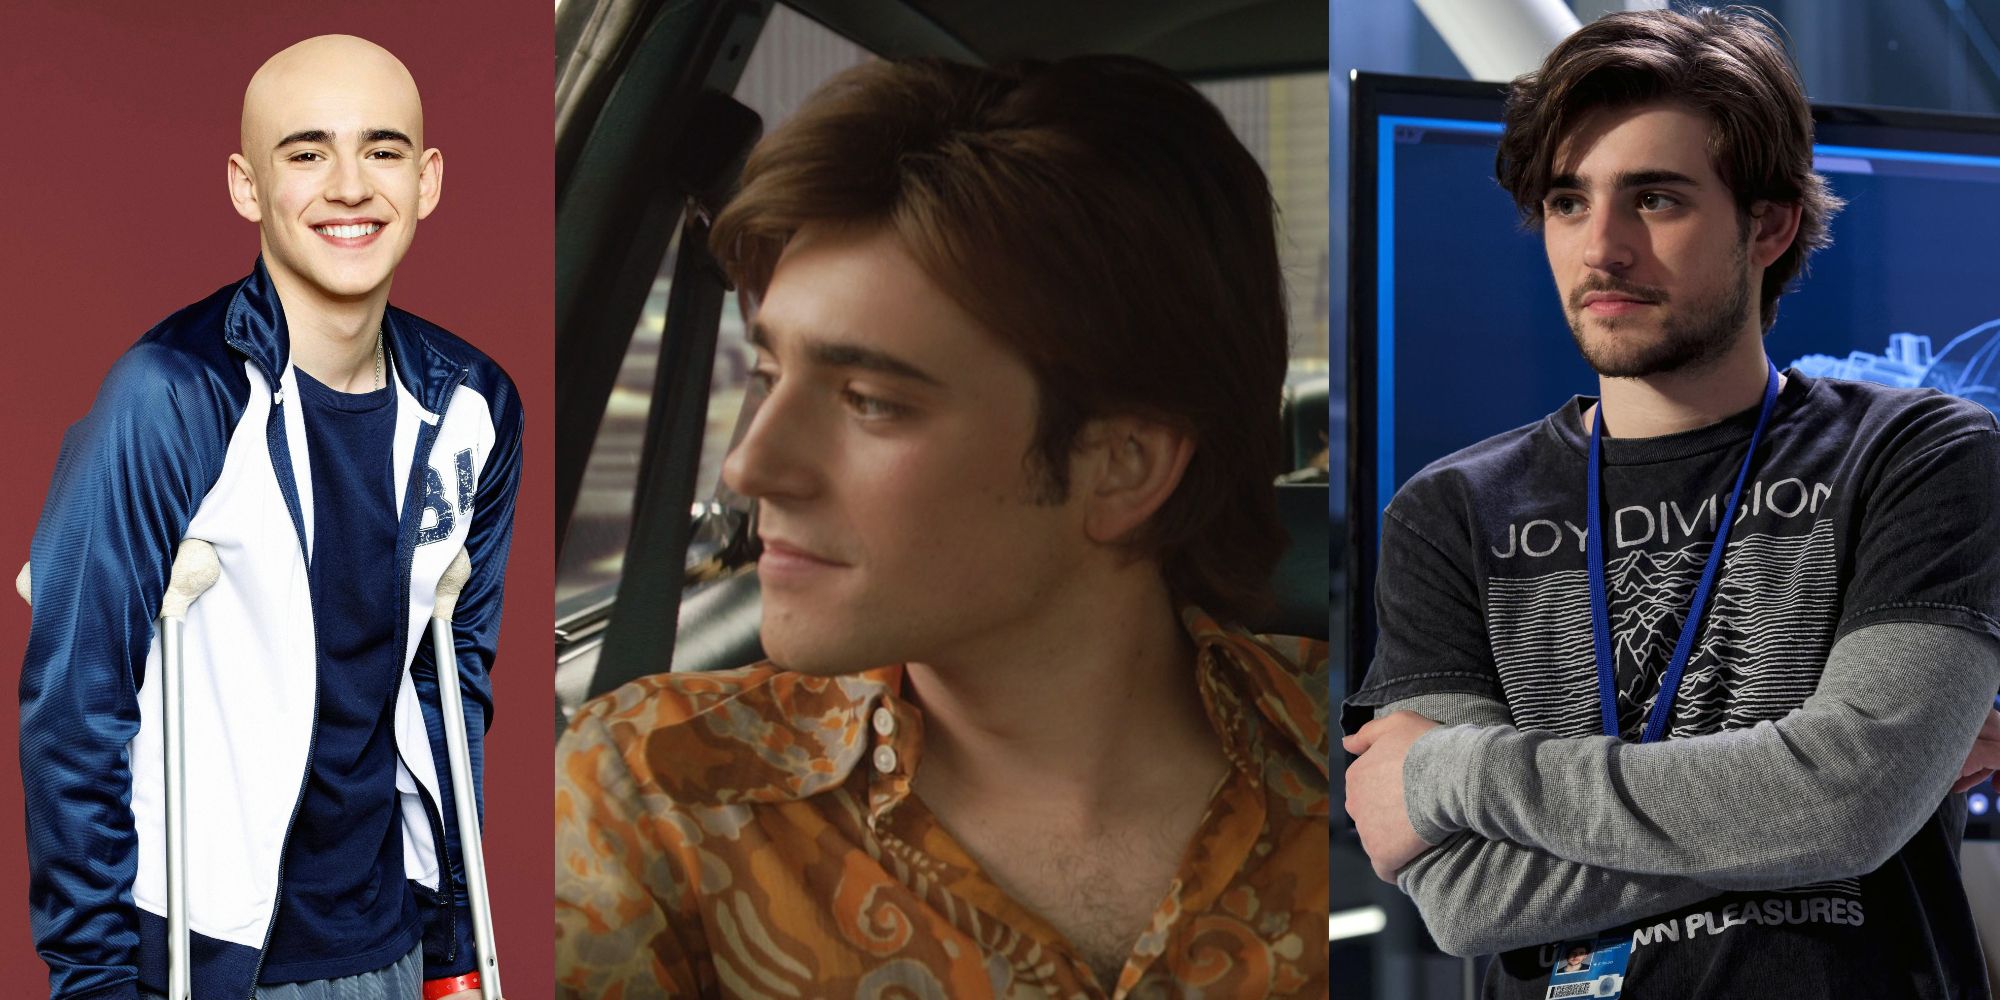 Charlie Rowe in Red Band Society Rocketman and Salvation